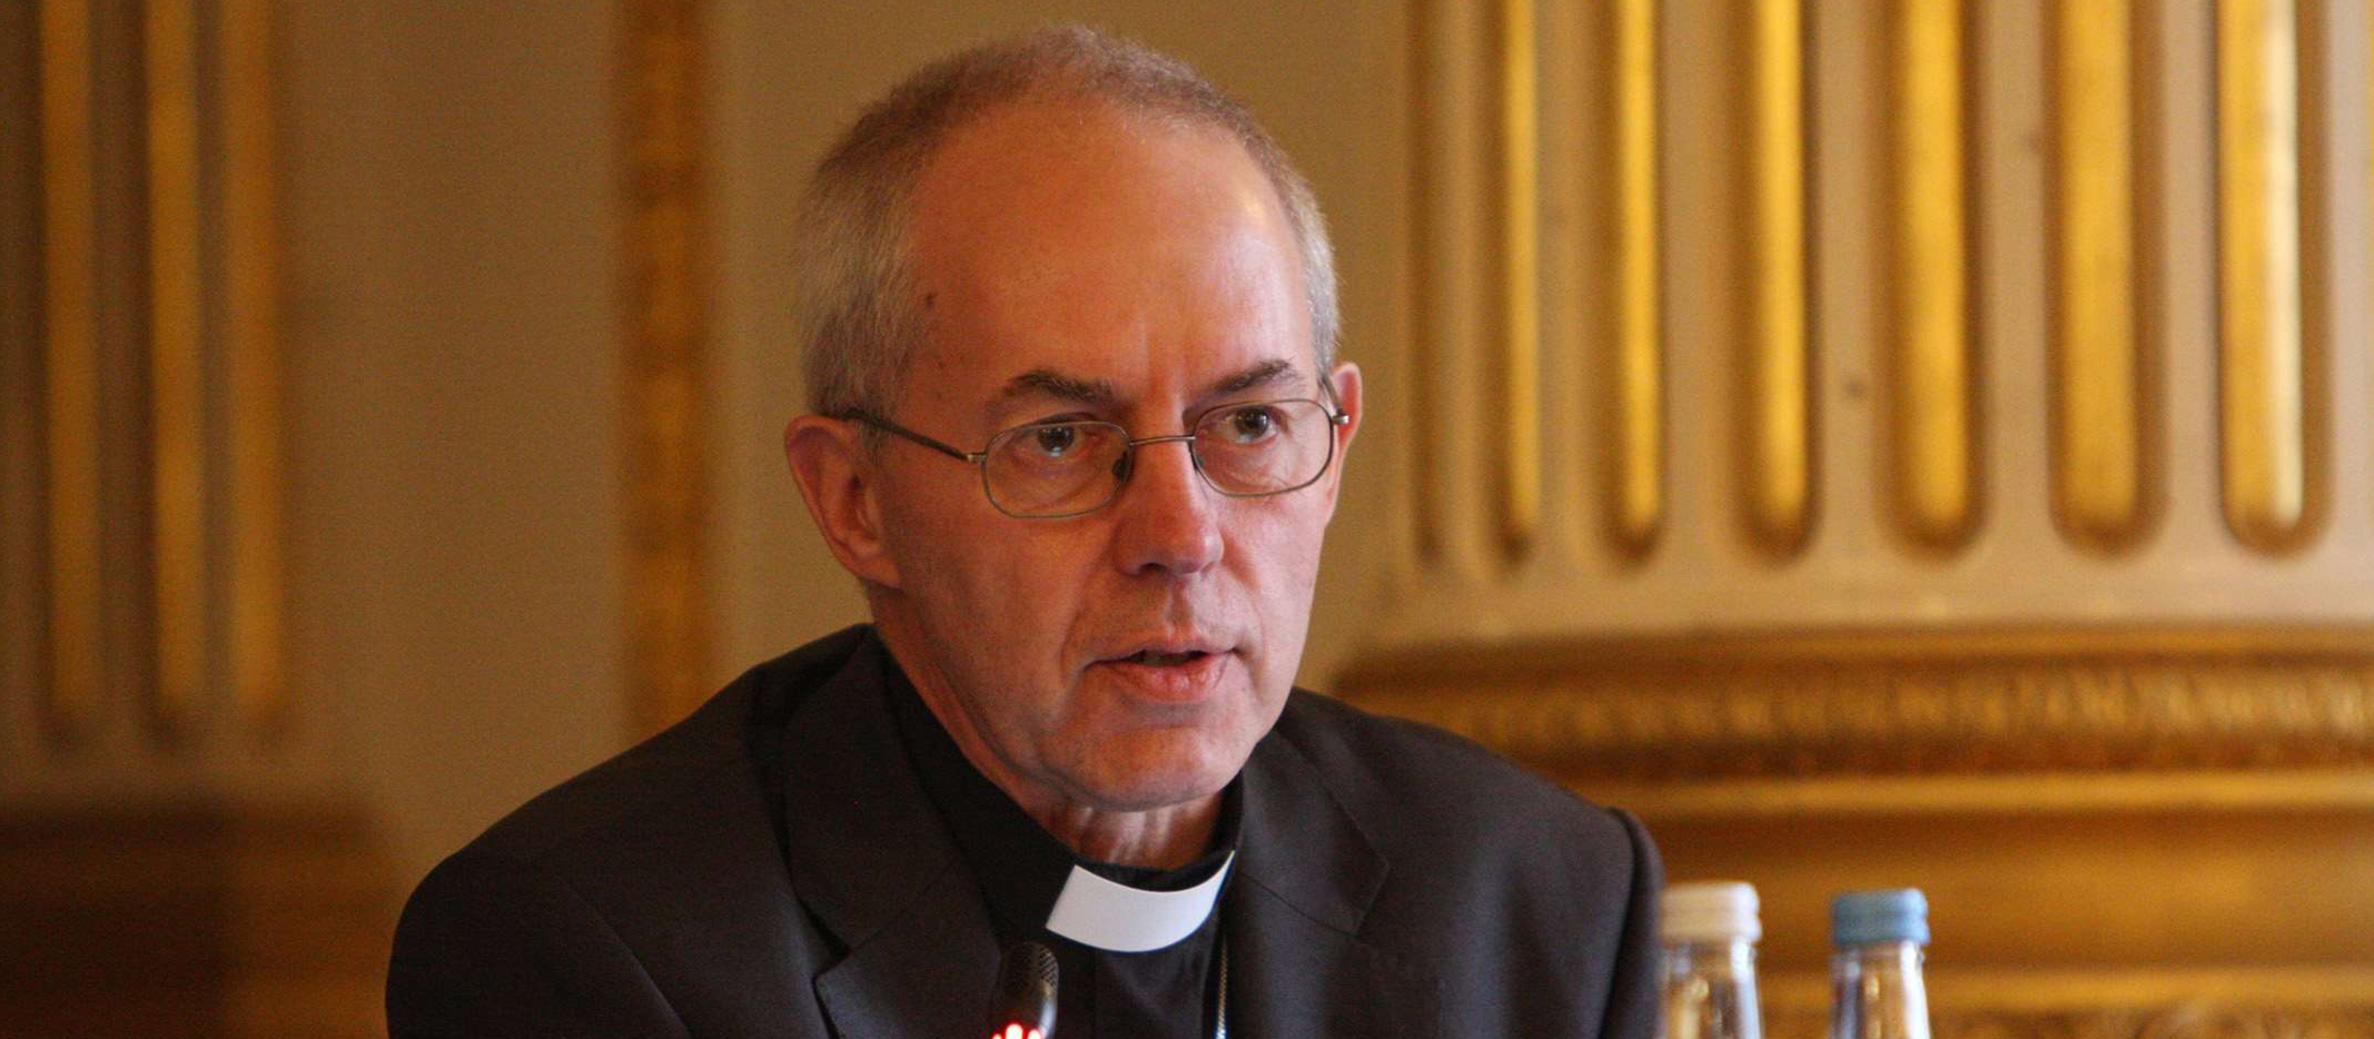 Archbishop Welby says Church needs to adopt IHRA definition of anti-Semitism formally